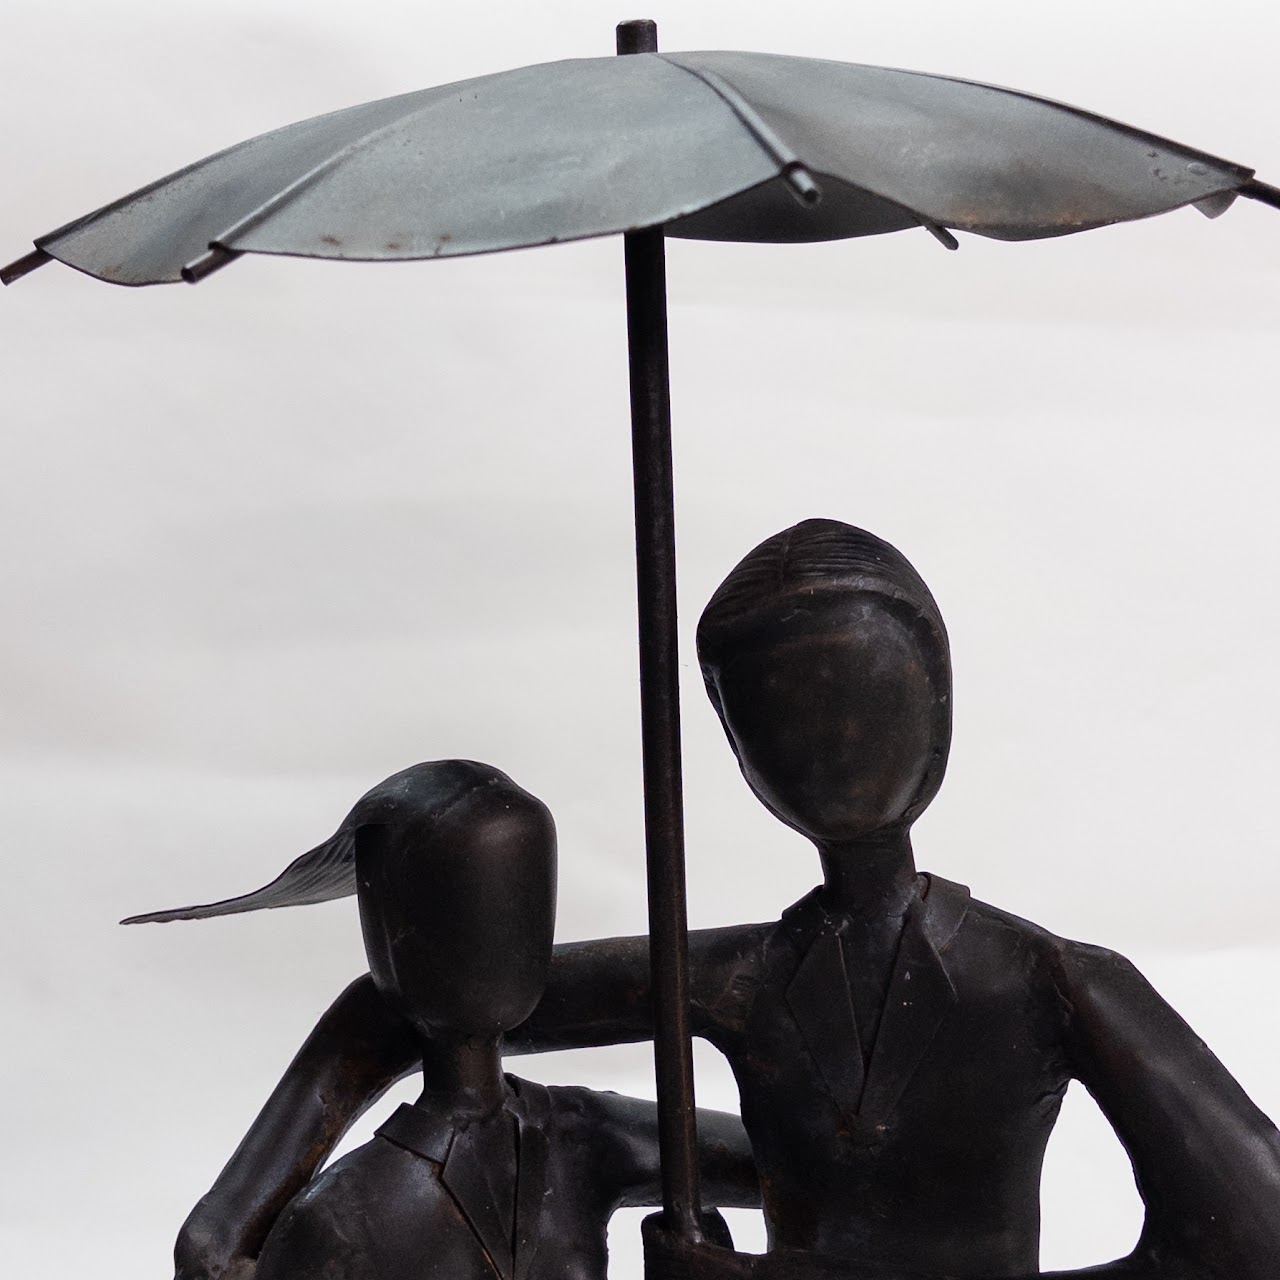 Distressed Metal Garden Statue of Two People in the Rain